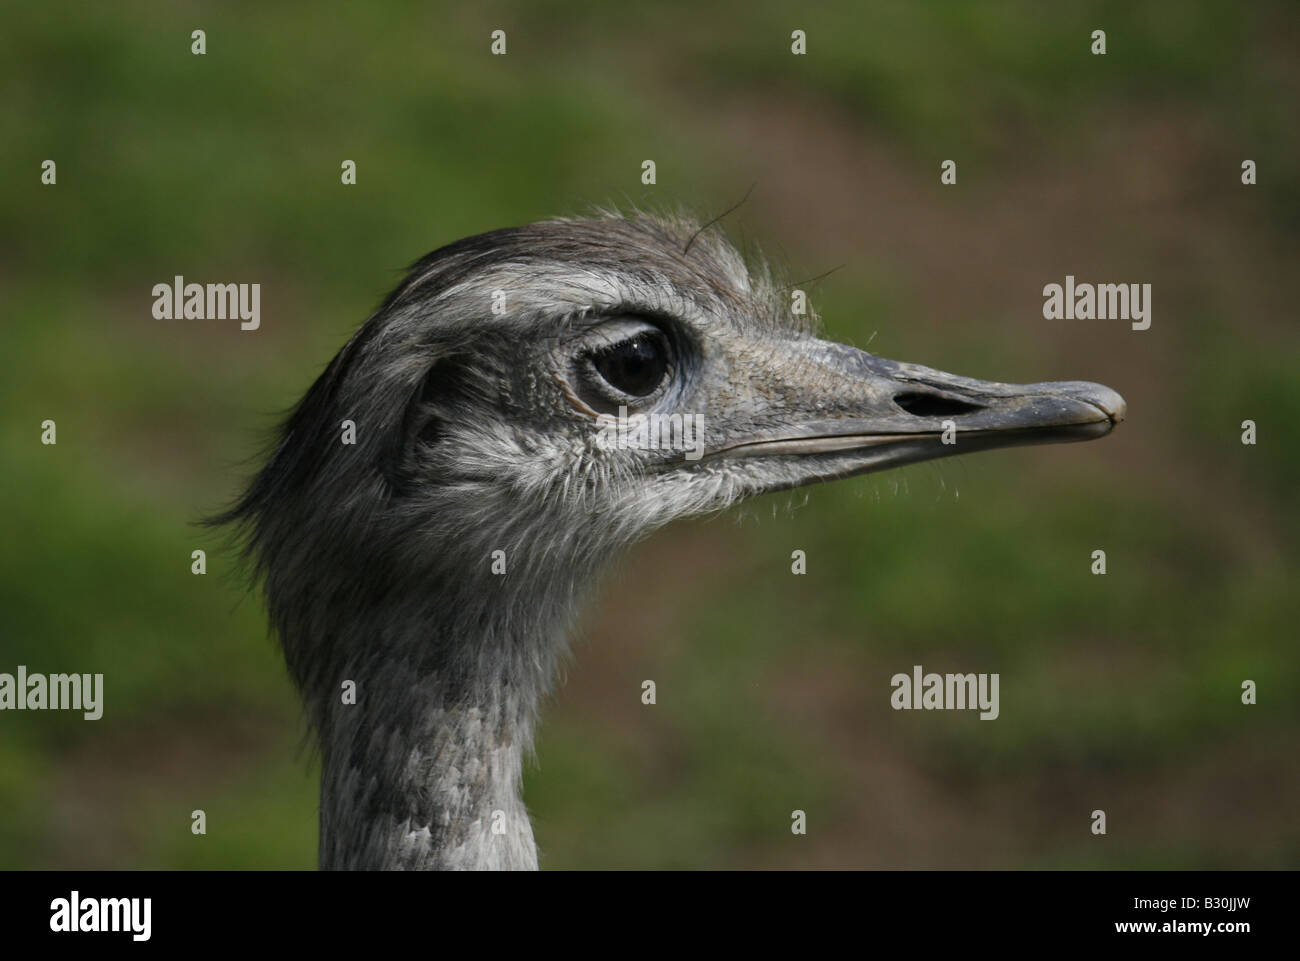 American or Common Rhea at Chester Zoo, UK. Stock Photo